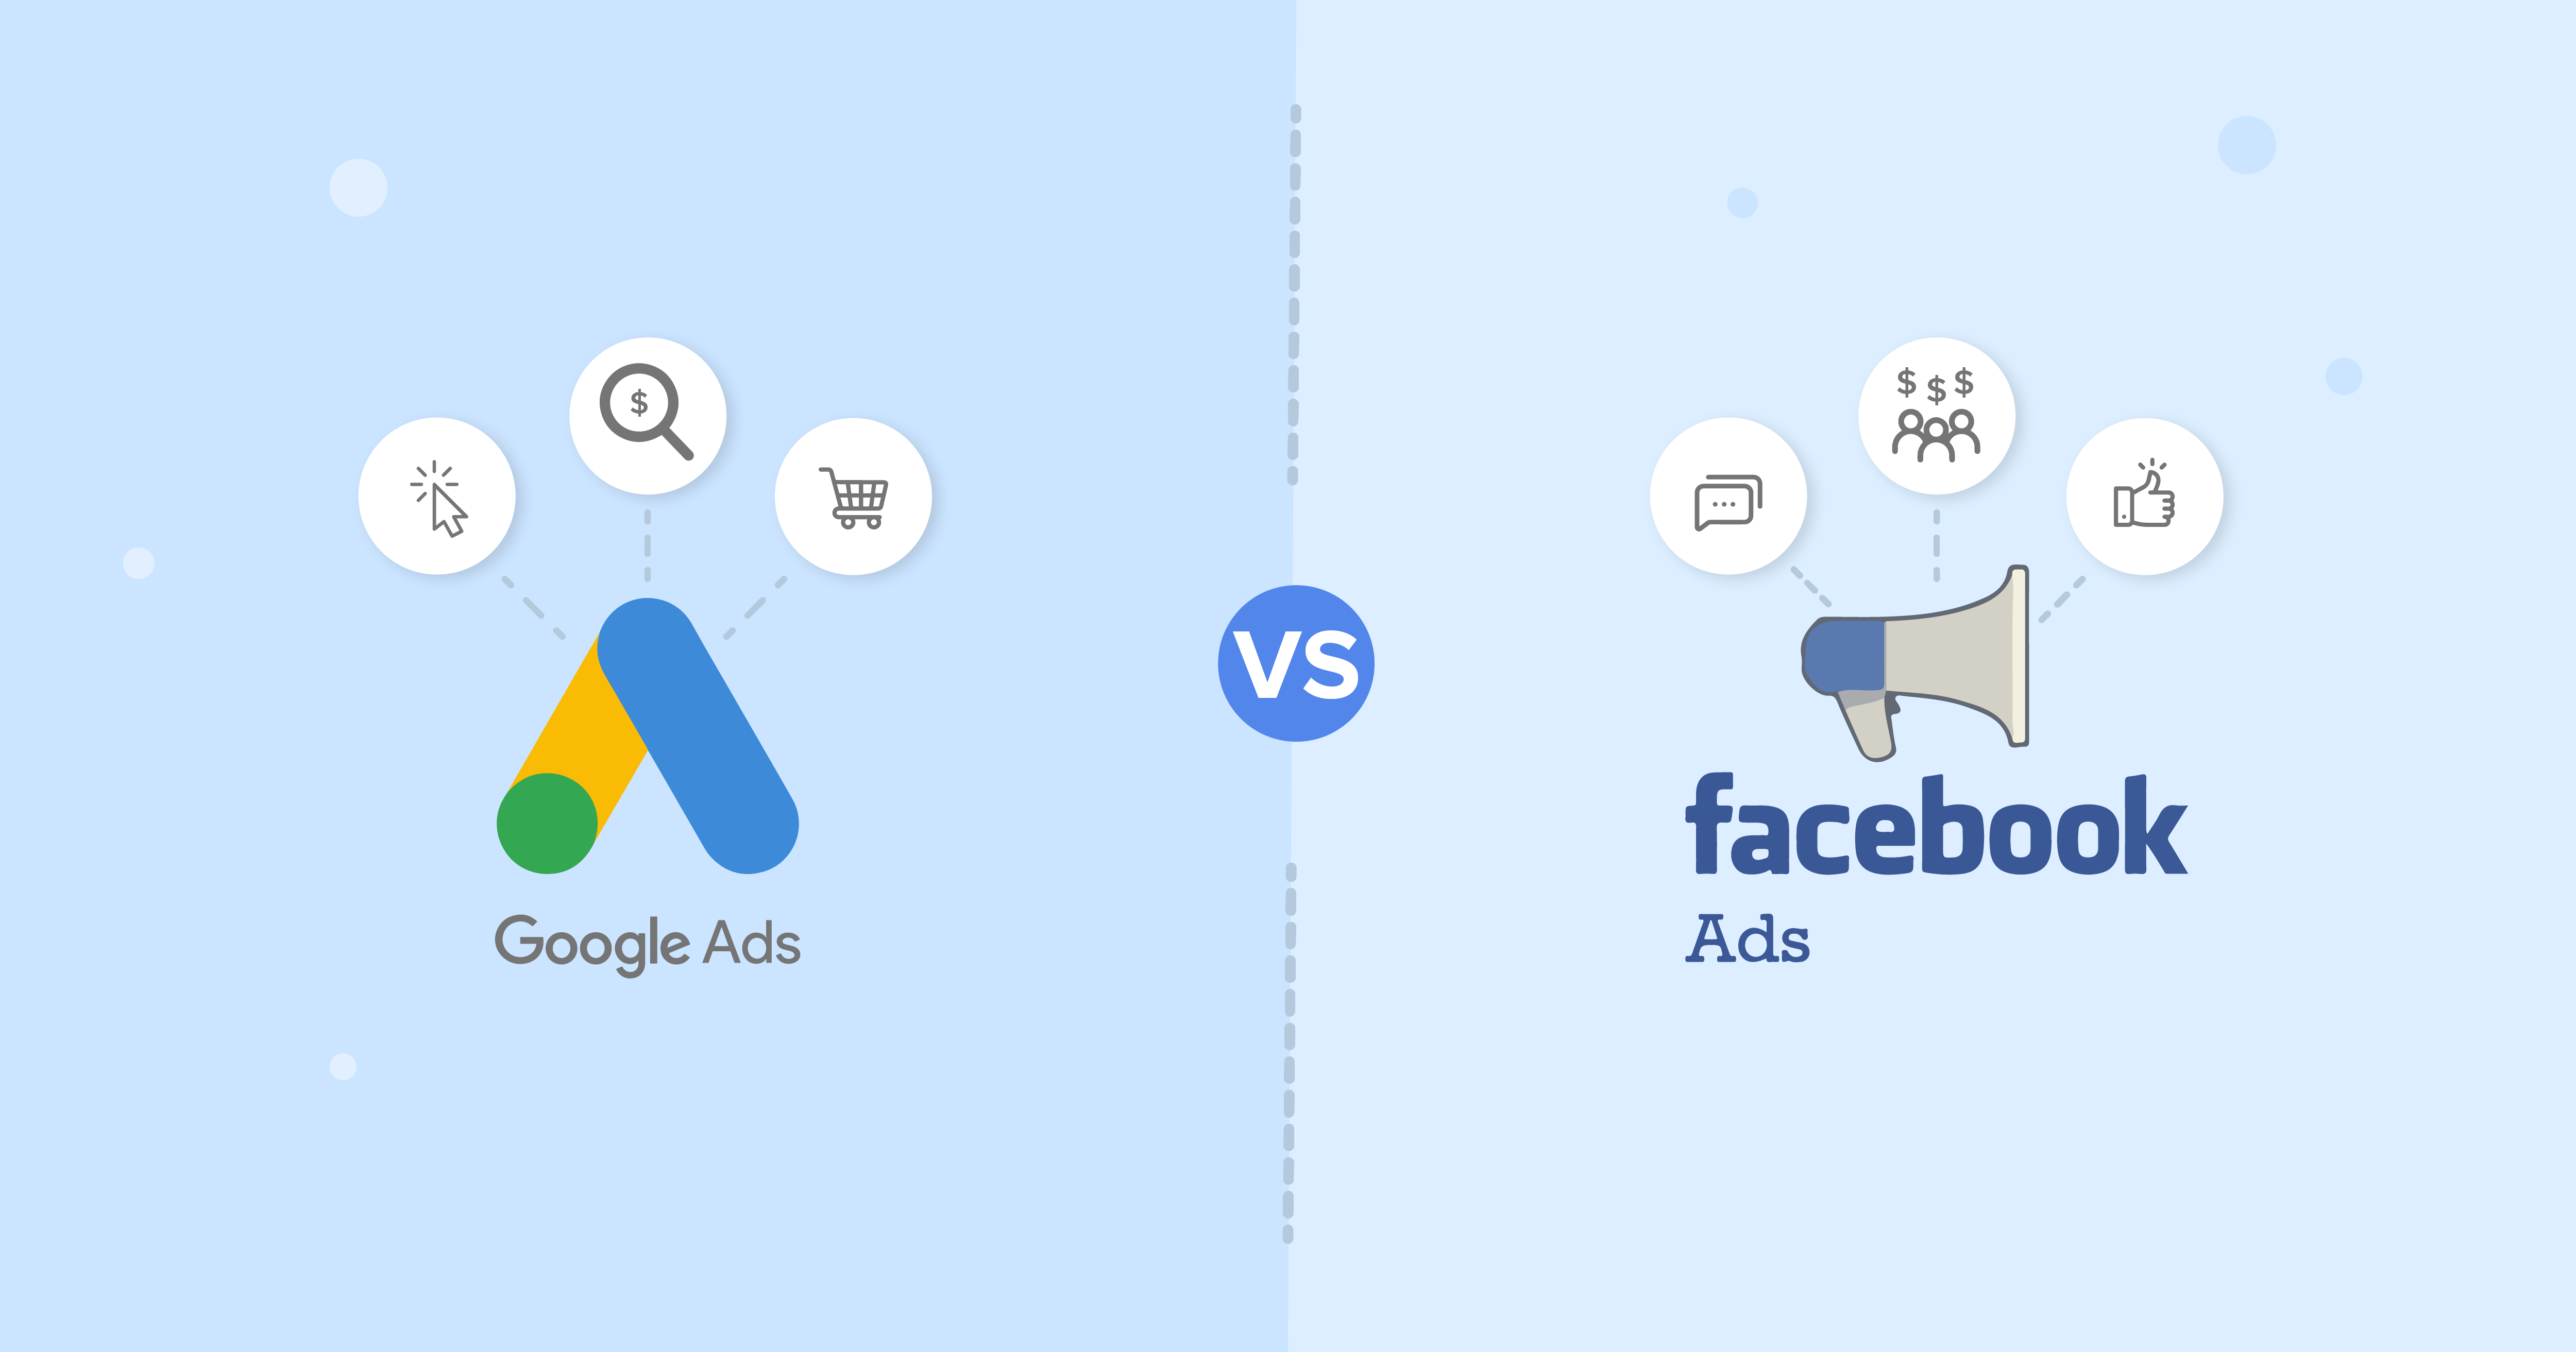 Why Facebook ads is better than Google Ads?